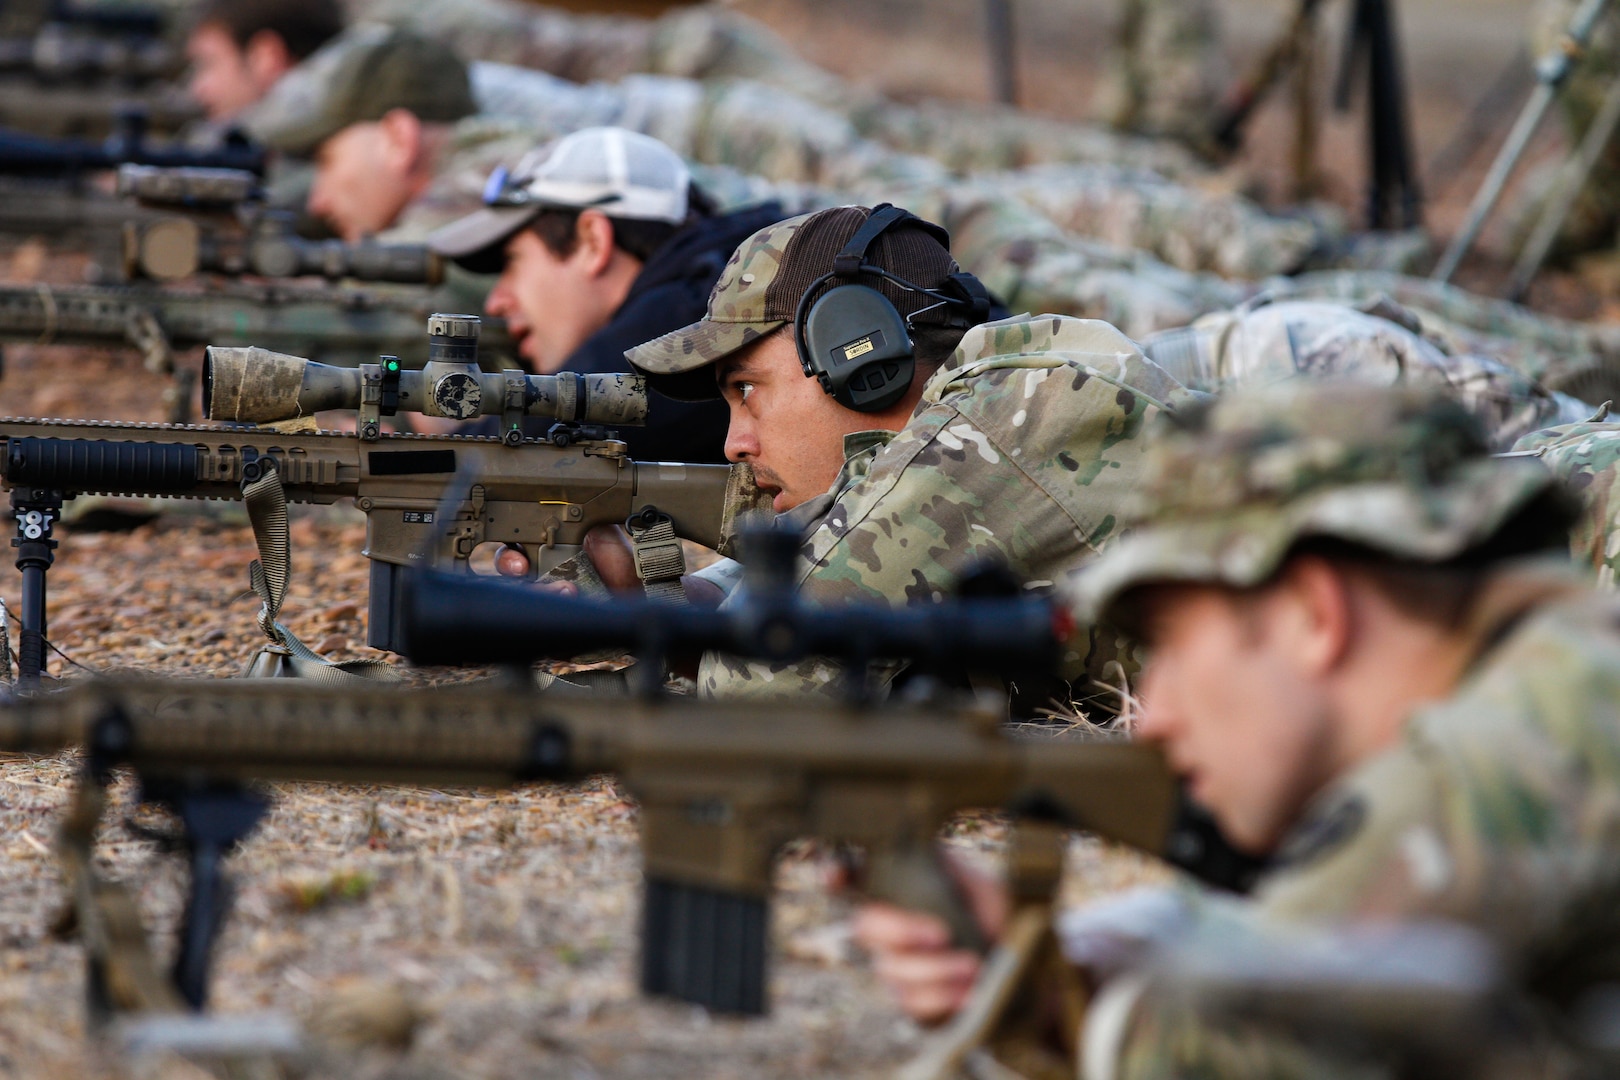 Thirty-three teams gathered at the 51st Winston P. Wilson and 31st Armed Forces Skill at Arms Meeting Sniper Rifle Matches hosted by the National Guard Marksmanship Training Center at the Fort Chaffee Joint Maneuver Training Center, Barling, Arkansas, Dec. 4-9, 2021.